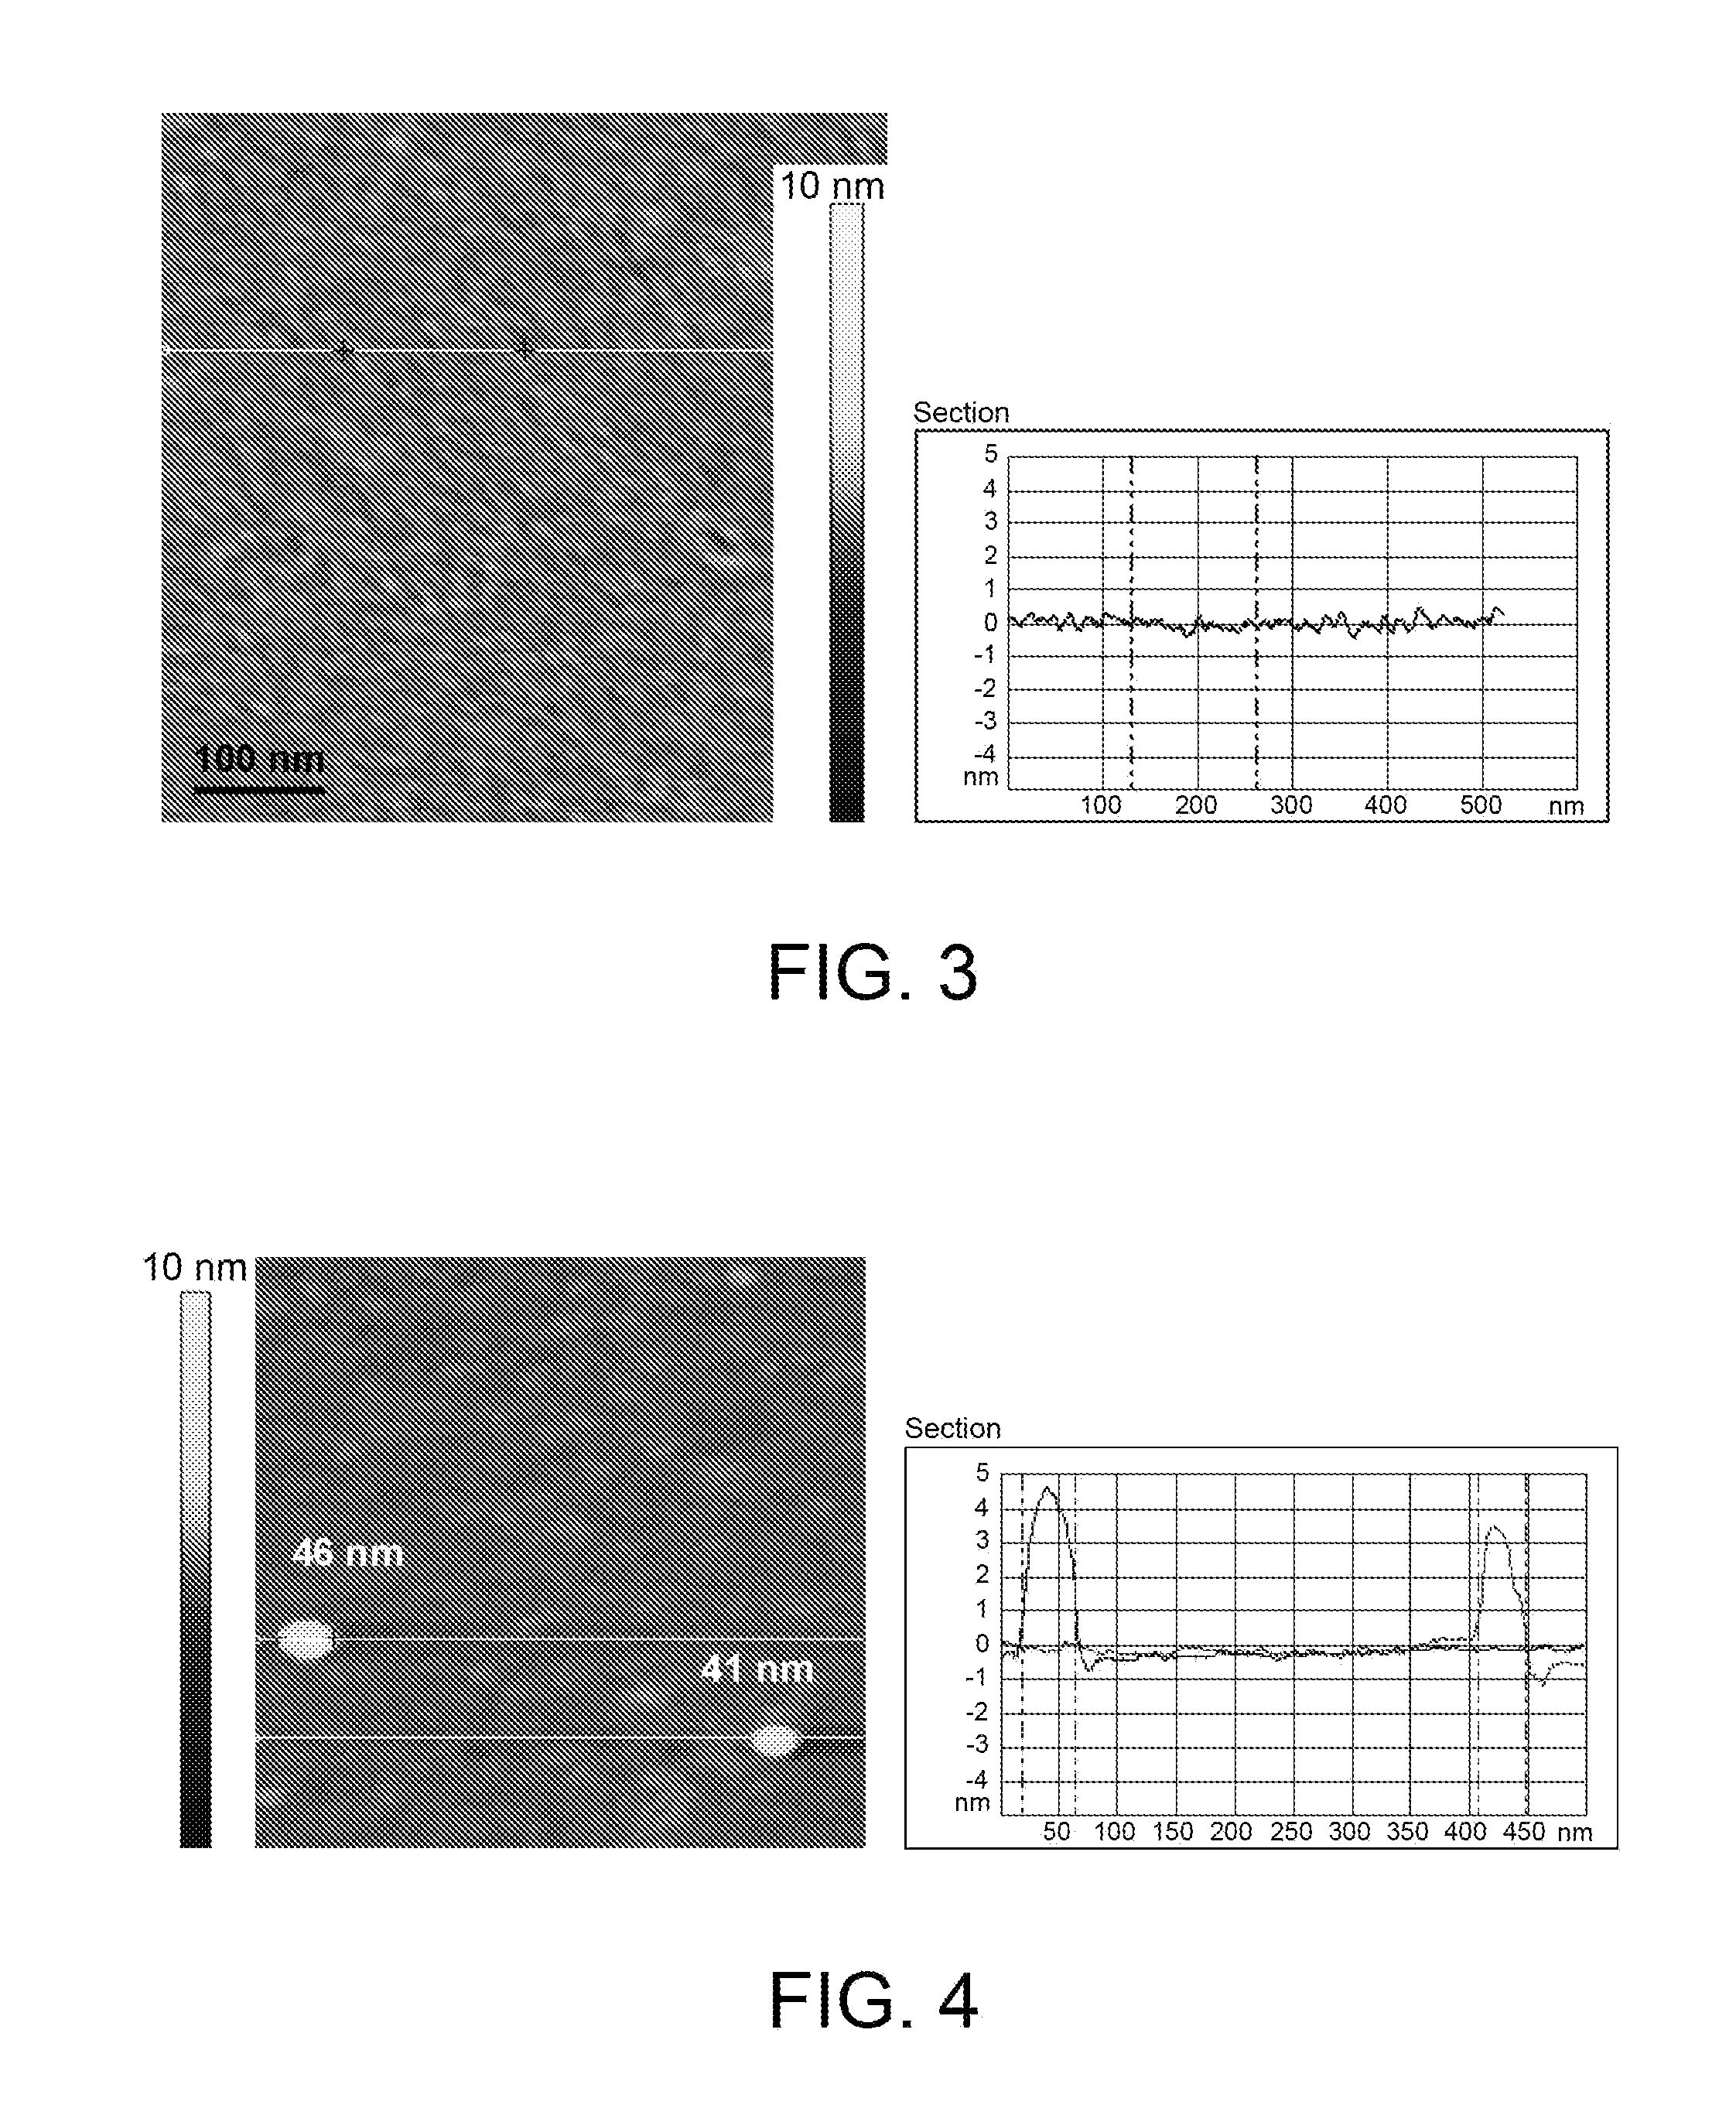 Planar support having an ultraflat surface and a device for detecting antigens comprising said planar support